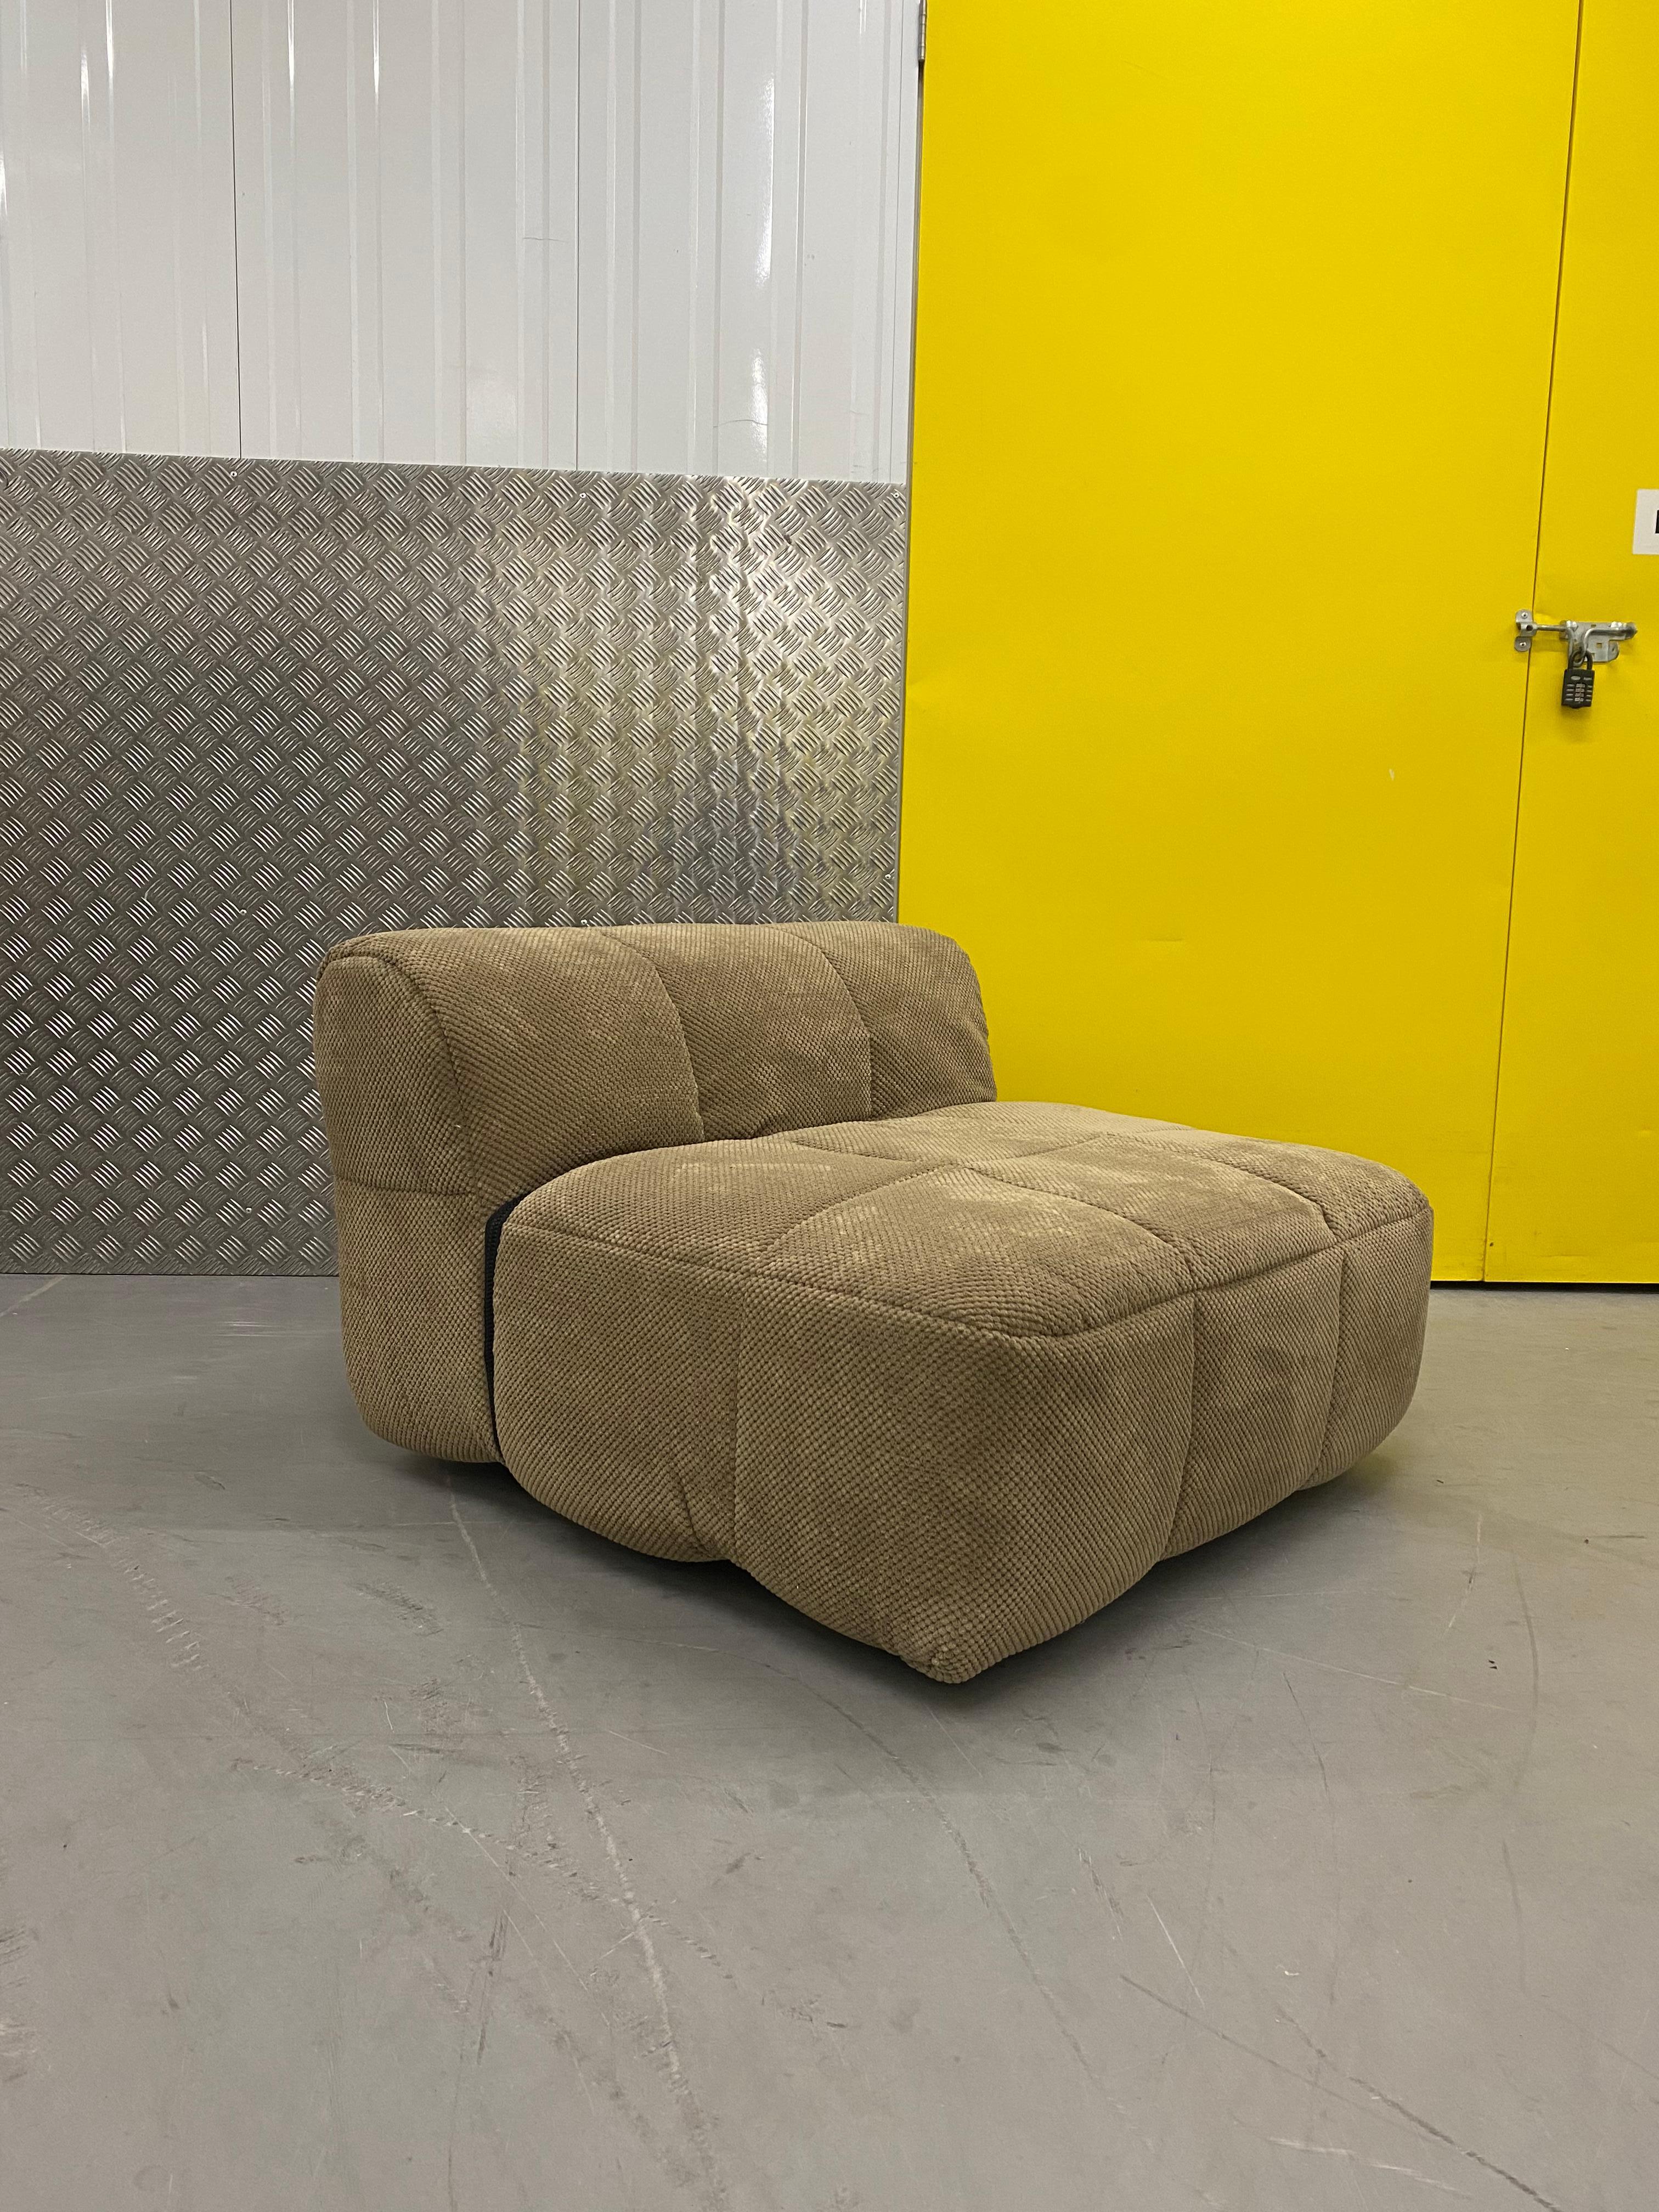 Modular Strips sofa by Cini Boeri for Arflex. 

The architect revolutionised the furniture market with this seating system, earning a compasso d’Oro in 1979. The sofa is characterised by a removable quilted lining, where the upholstery becomes an